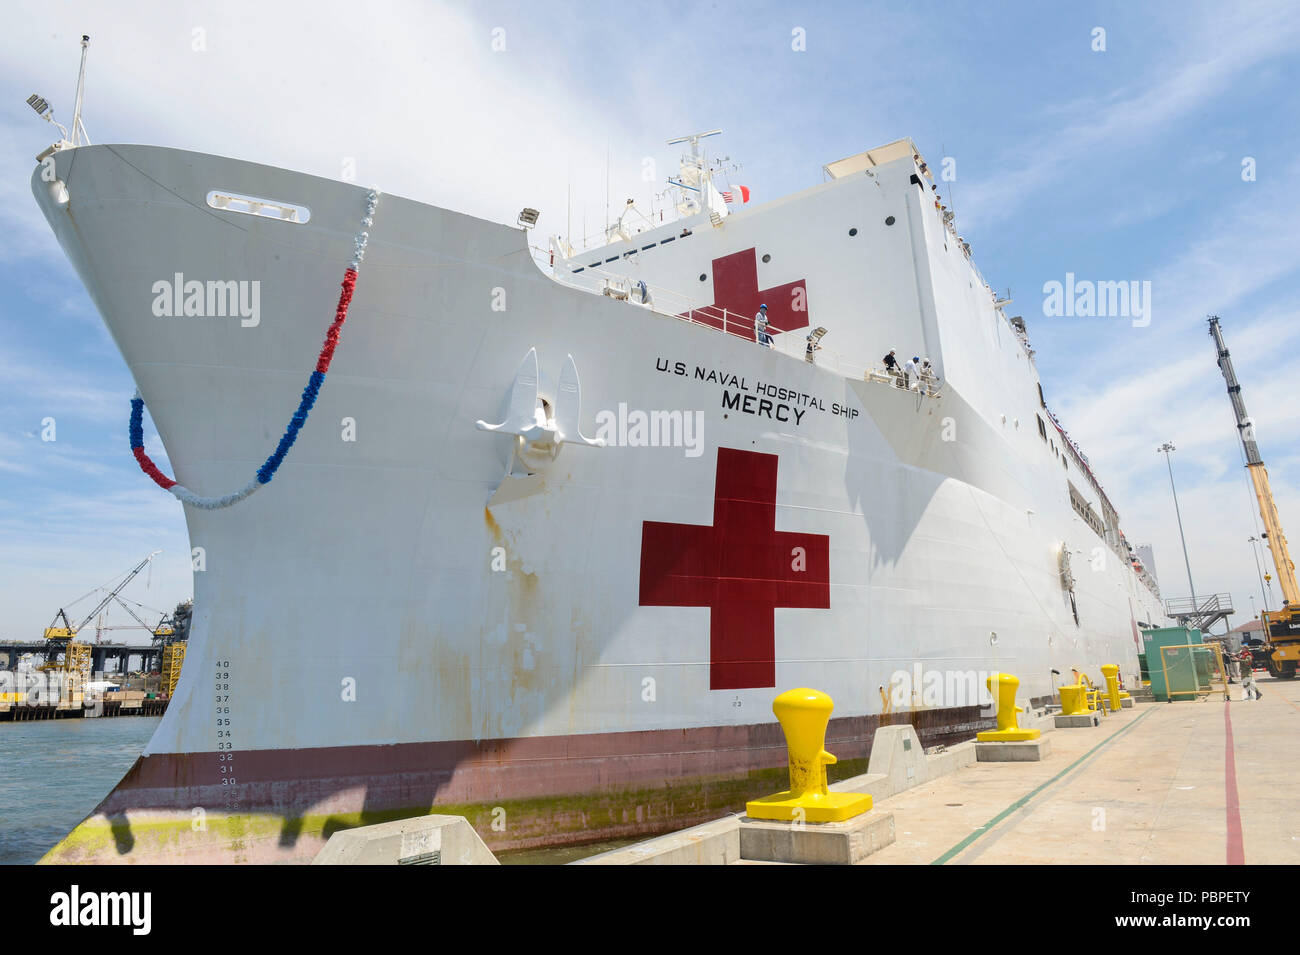 180721-N-PN275-1061 SAN DIEGO (July 21, 2018) USNS Mercy (T-AH 19) moors to the pier at Naval Base San Diego upon returning from Pacific Partnership 2018. Mercy was underway from February to July, providing public health, engineering and disaster response services to host countries to strengthen ties across the Indo-Asia Pacific region.(U.S. Navy Photo by Mass Communication Specialist 2nd Class Zach Kreitzer) Stock Photo